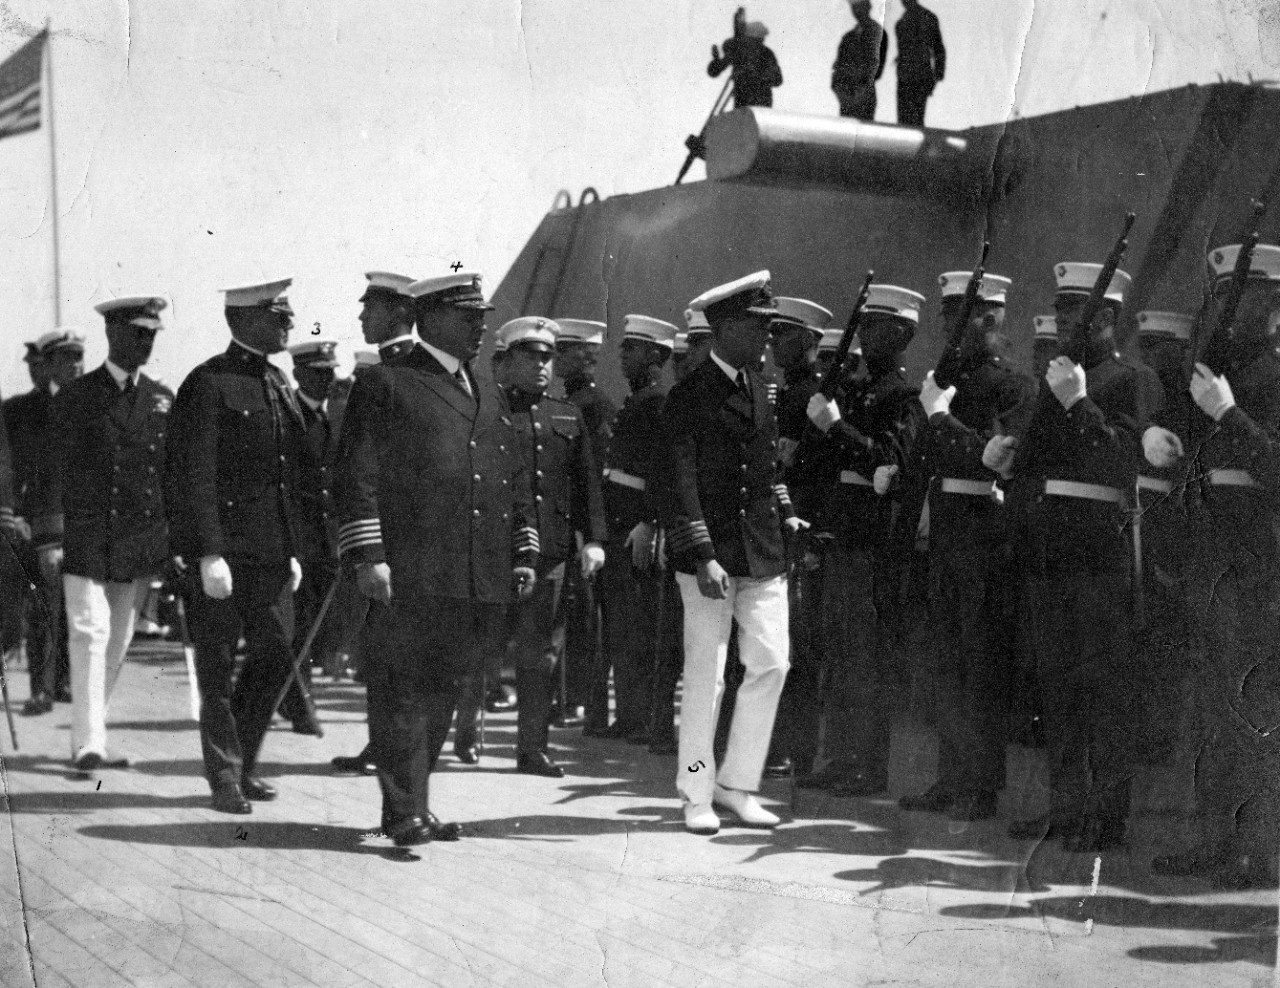 4 photographs depicting the visit of Edward, Prince of Wales to USS New Mexico (BB-40) in San Diego, California in 1920 (FILED: OVERSIZE PRINTS) Personnel: Captain A.L. WILLARD, USN; Rear Admiral Sir Lionel HALSEY, R.N.; Vice Admiral C.S. WILLIAMS, USN; Major H.T. WIRGMAN, USMC; Commander E. TINNEY, USN.